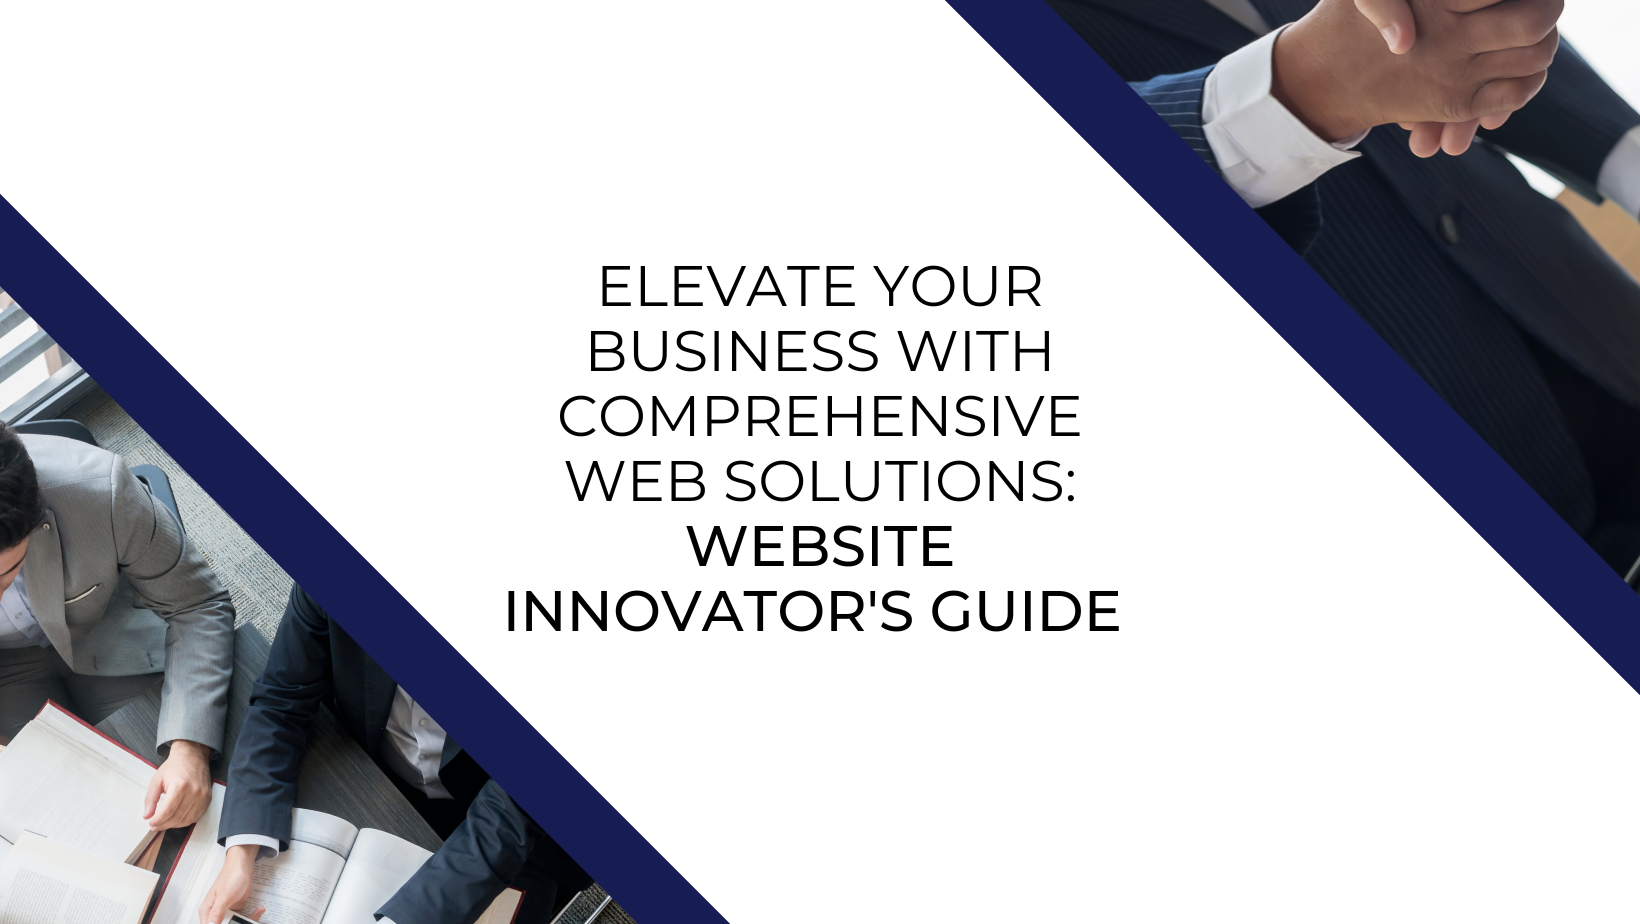 Elevate Your Business with Comprehensive Web Solutions: Website Innovator's Guide 